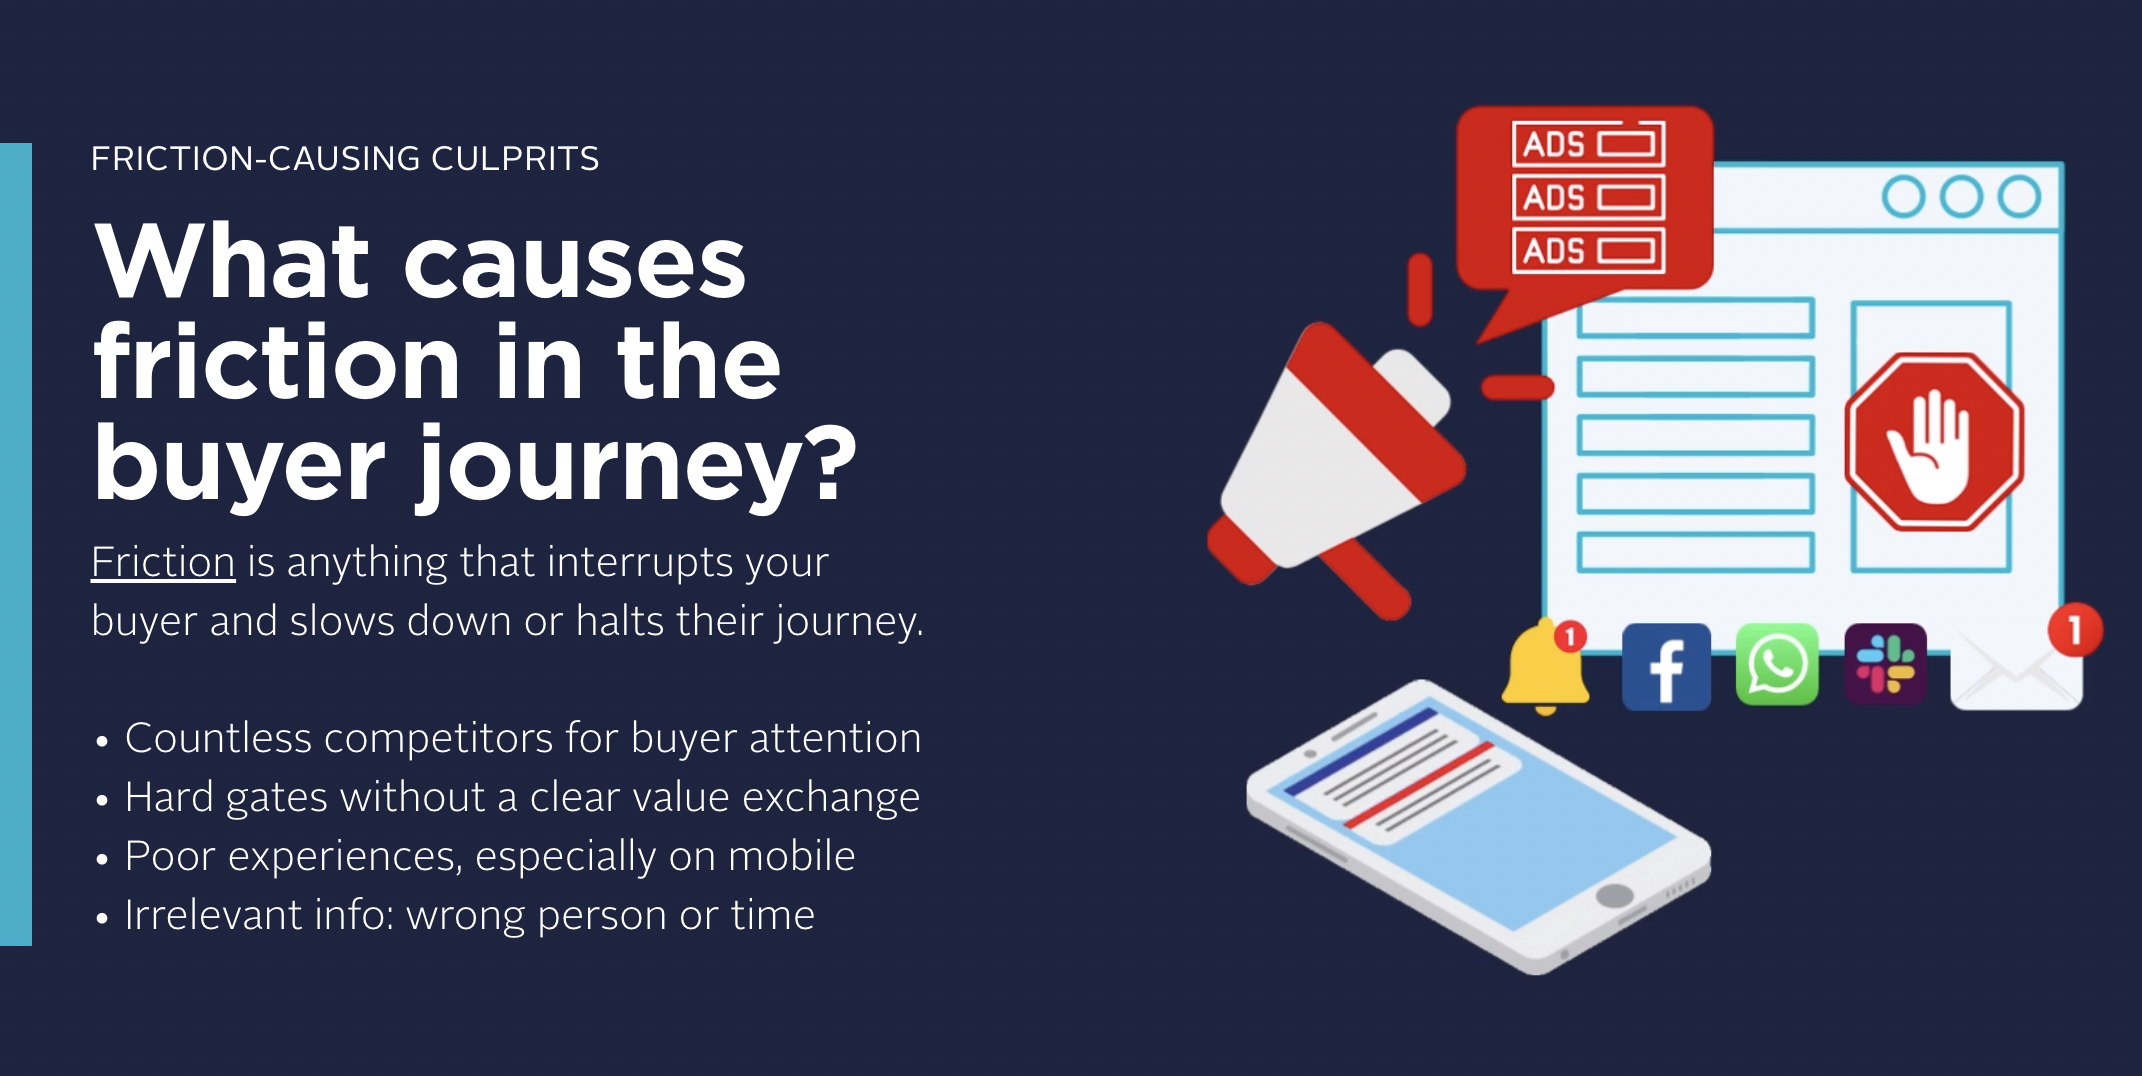 summary image of what causes friction in the buyer journey